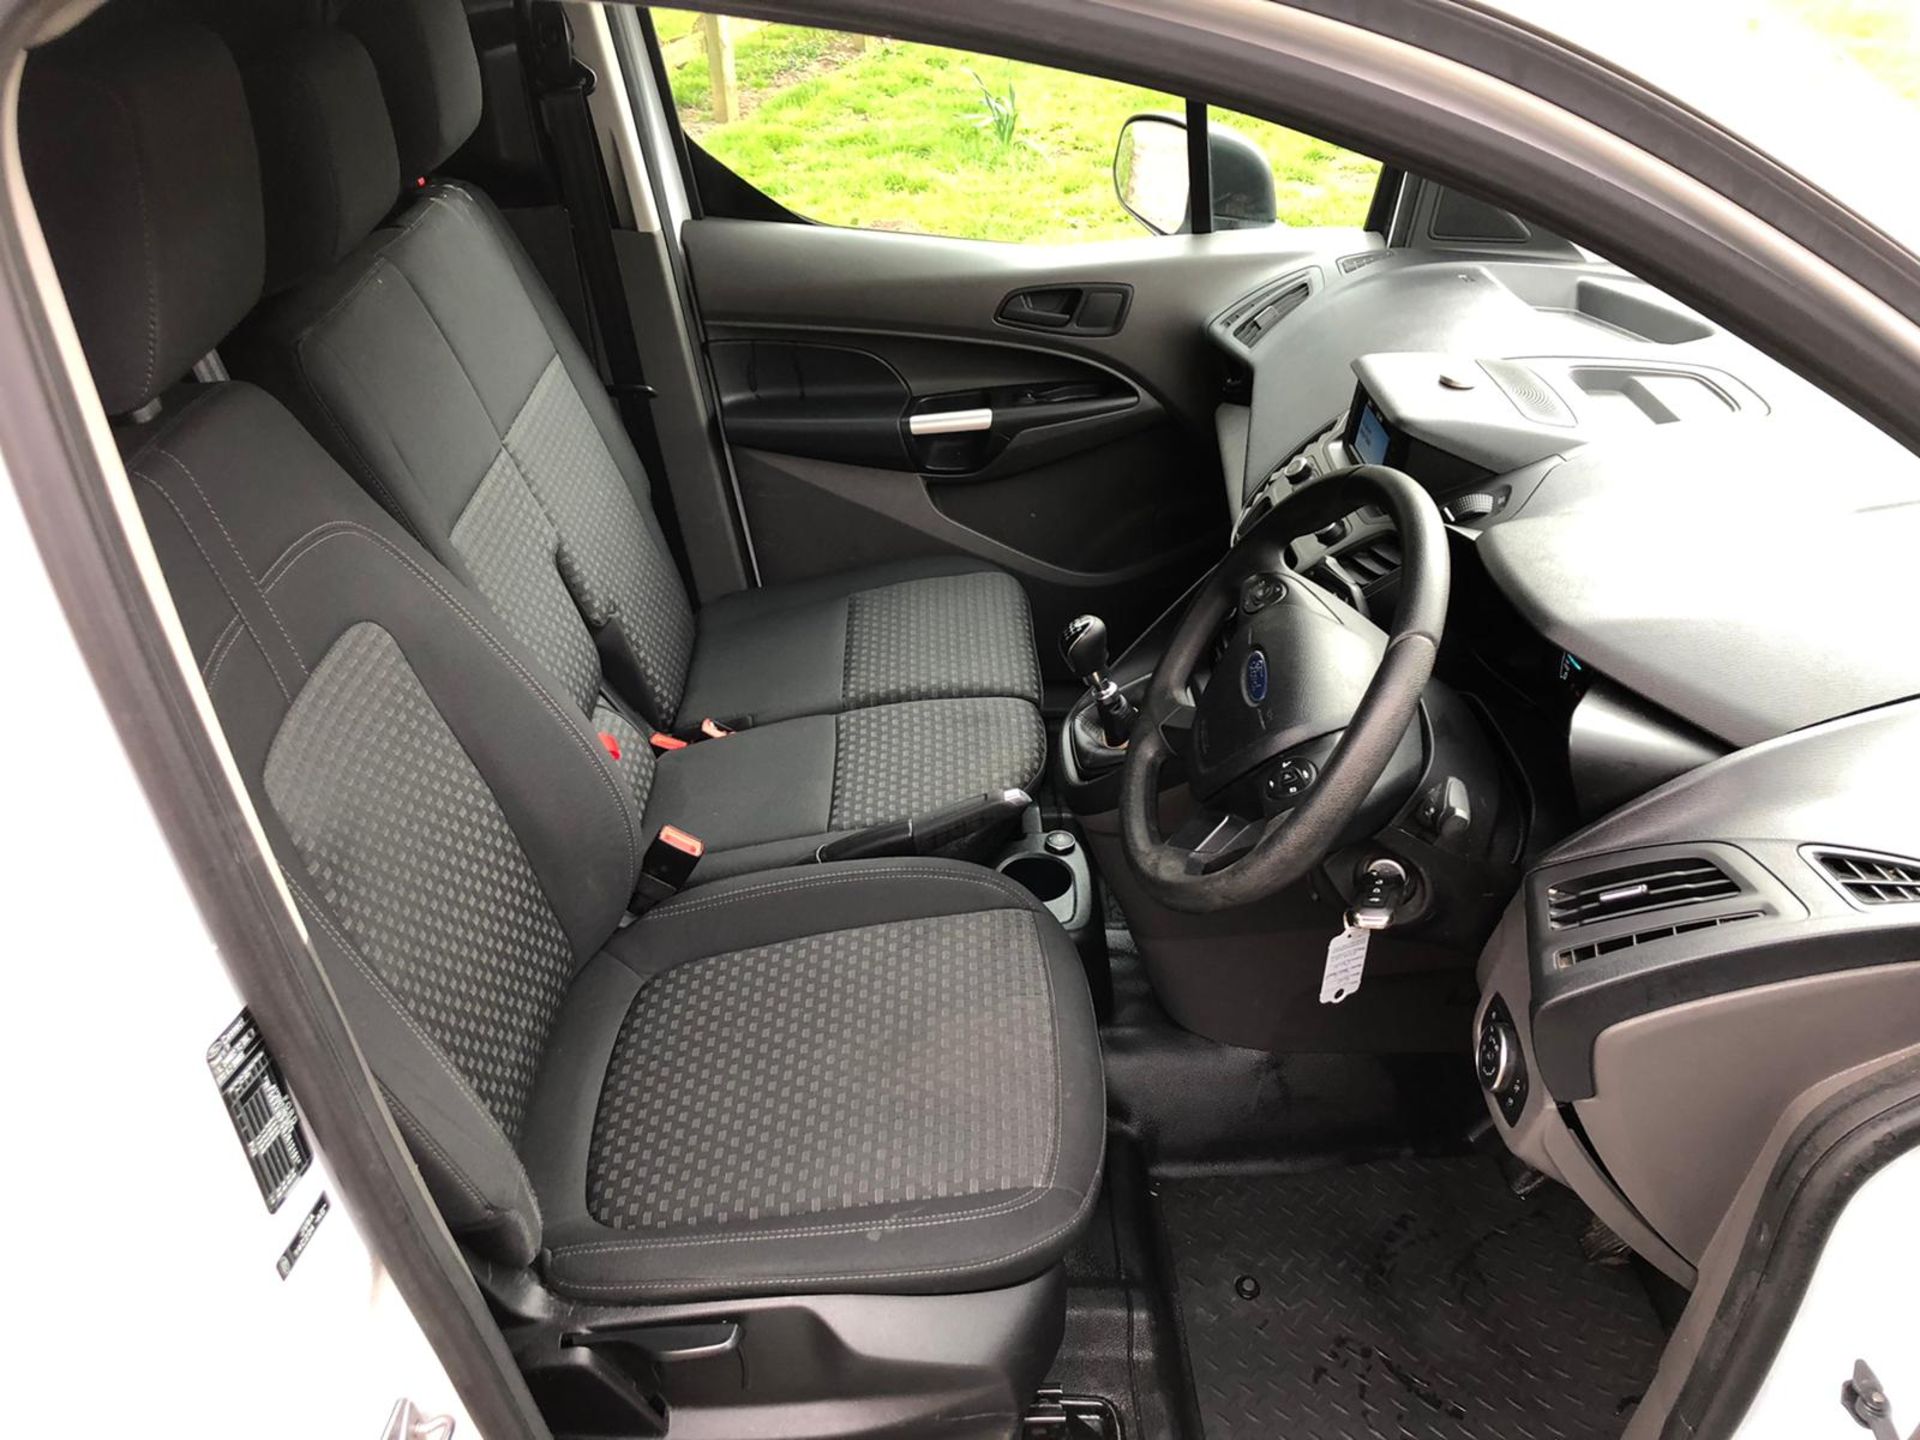 2019/19 REG FORD TRANSIT CONNECT 240 TREND 1.5 DIESEL WHITE PANEL VAN, SHOWING 0 FORMER KEEPERS - Image 12 of 14